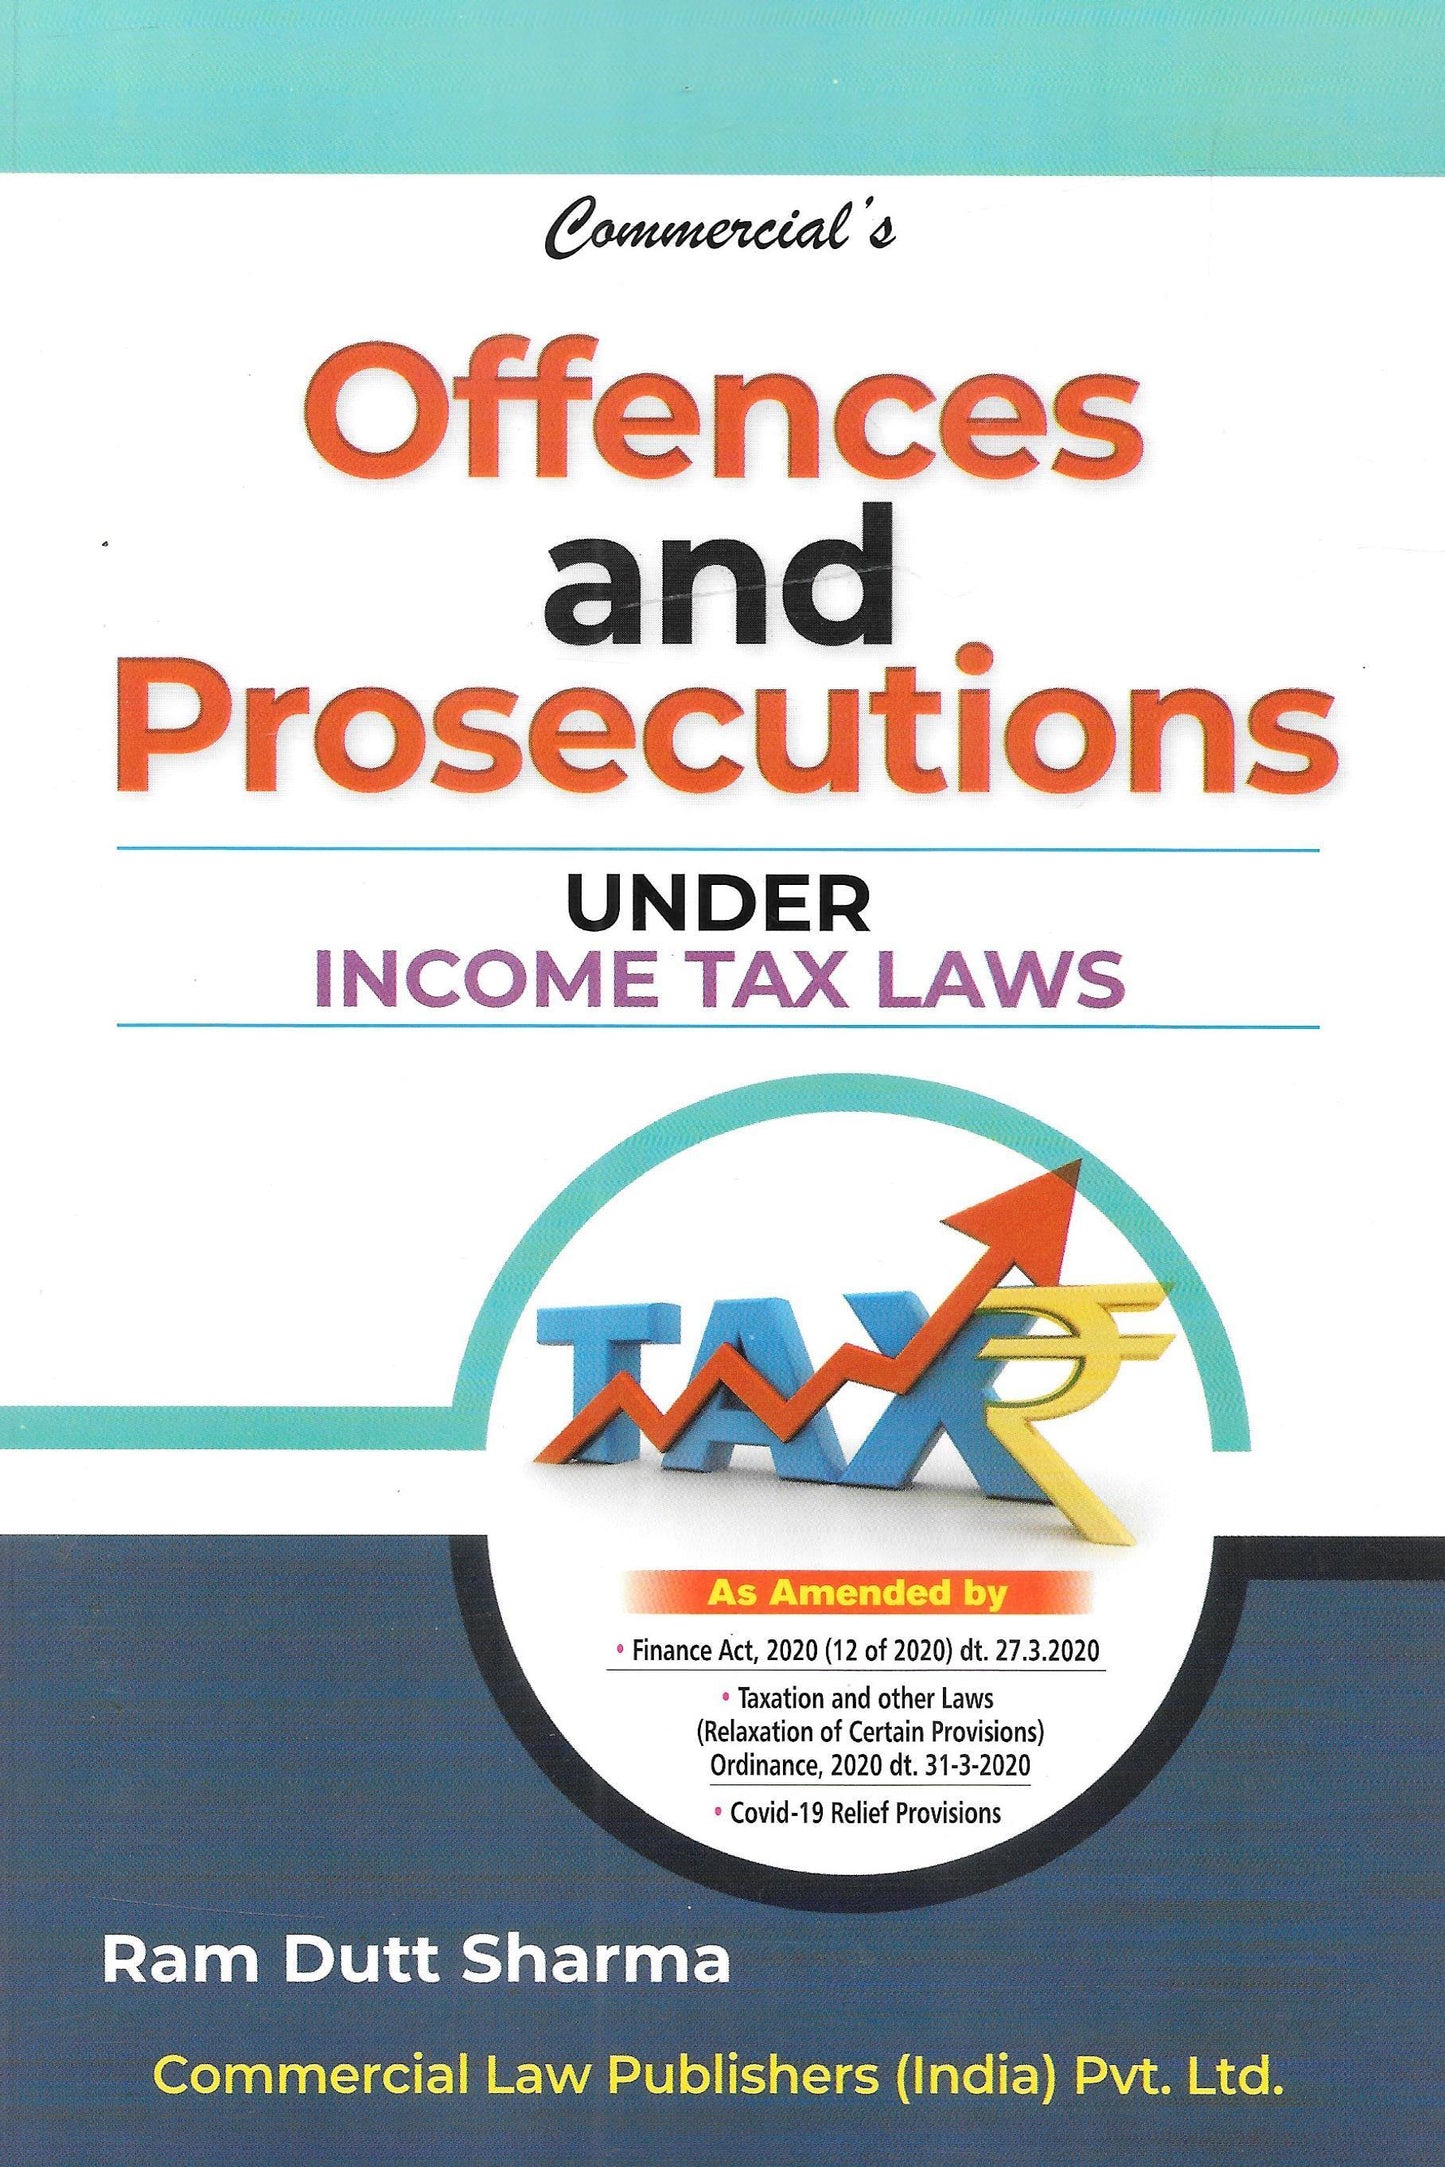 Offence and Prosecutions under Income Tax Laws